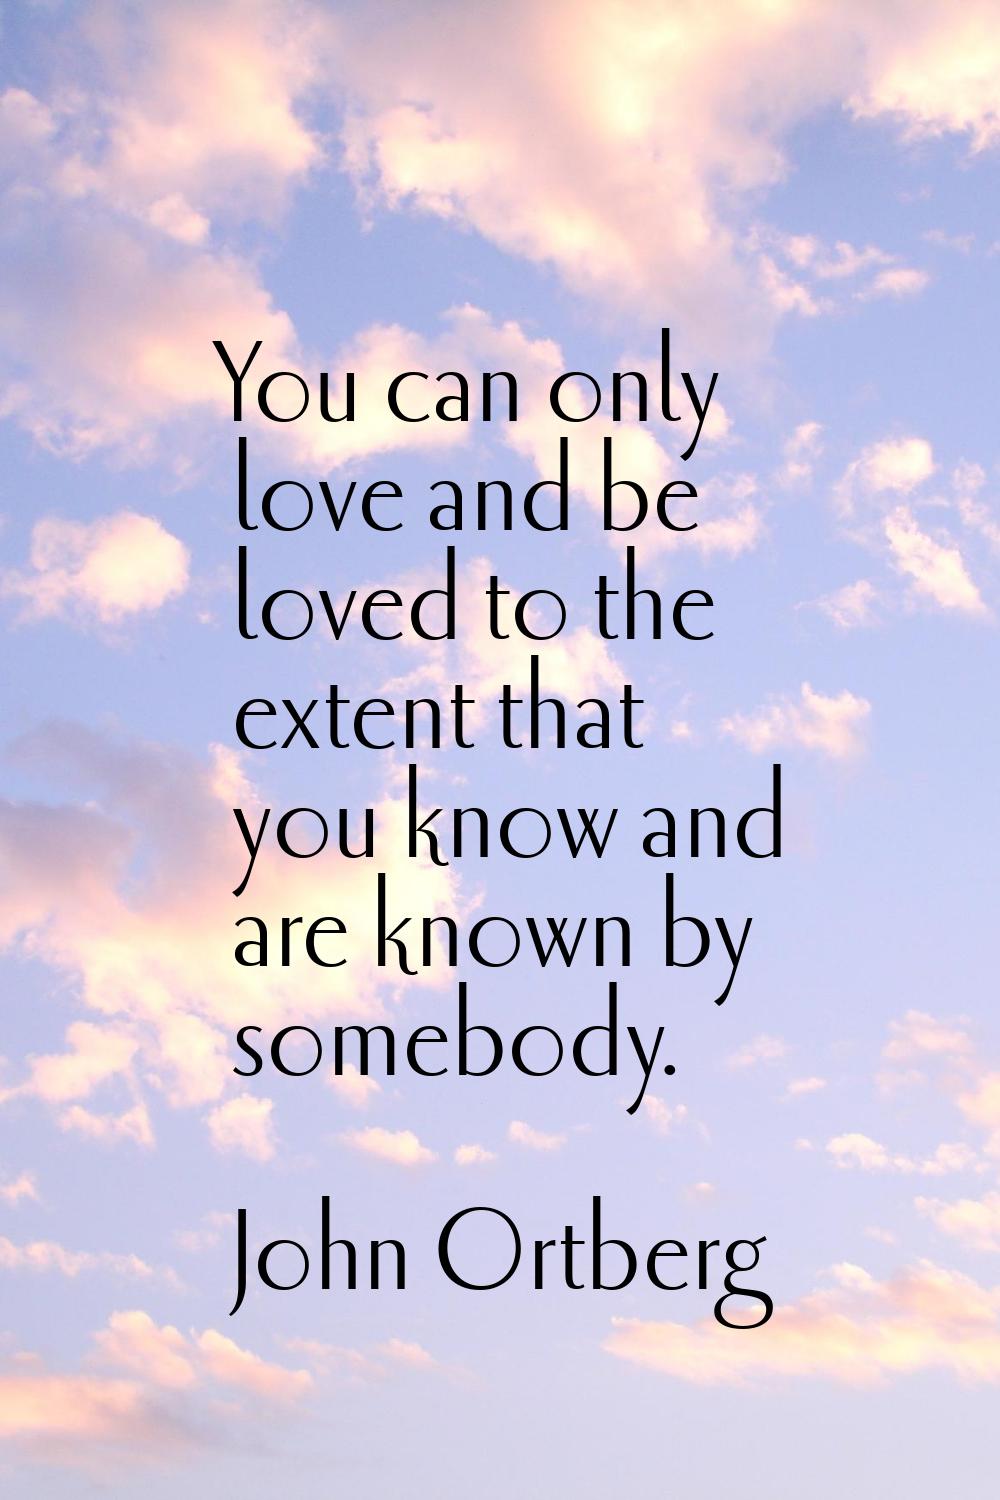 You can only love and be loved to the extent that you know and are known by somebody.